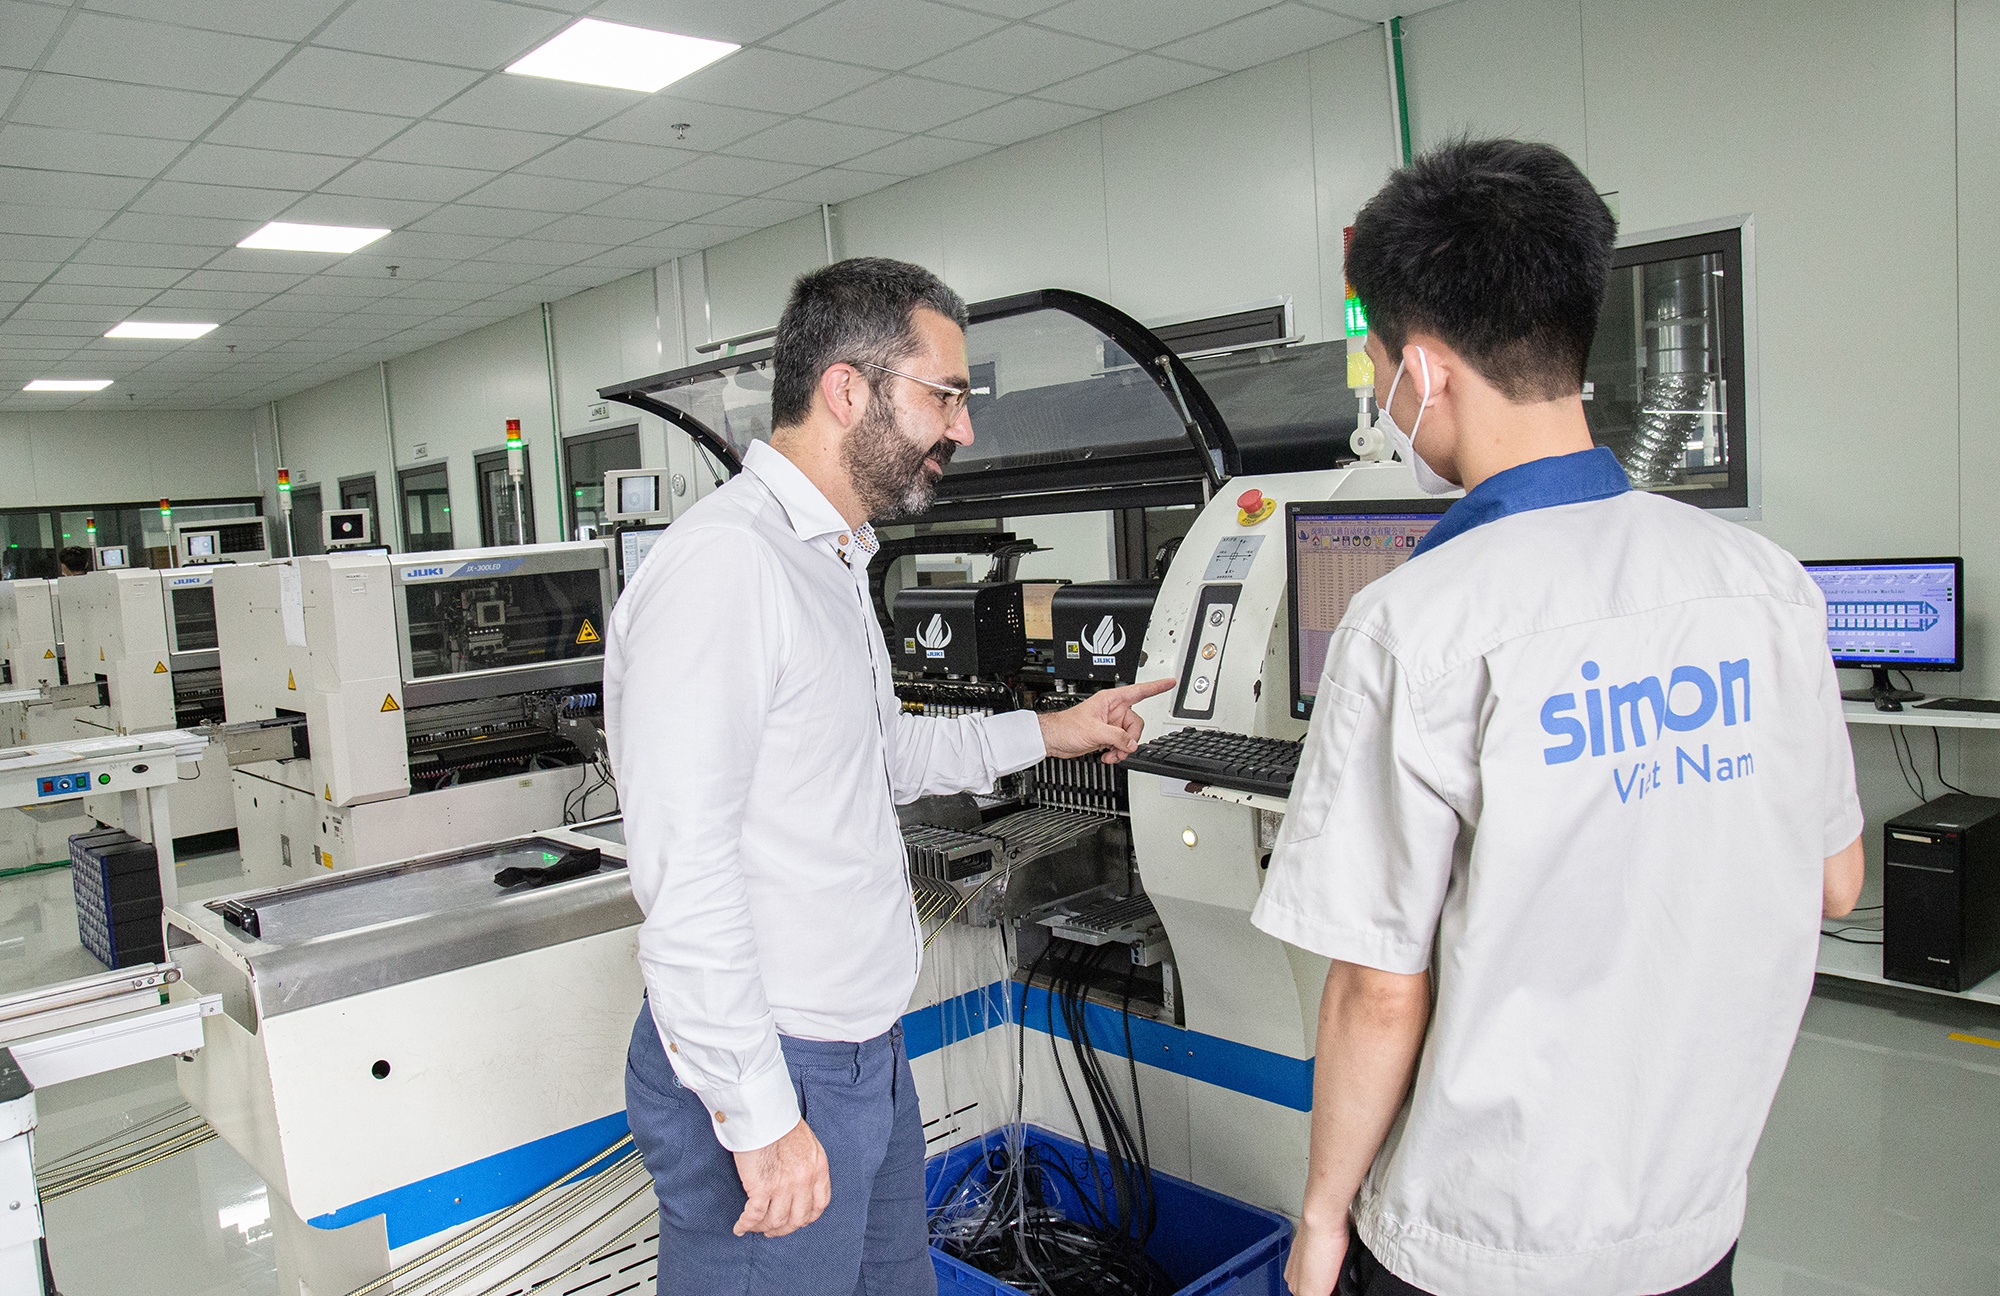 The production line of Simon Vietnam factory is operated according to the standards of Simon Group